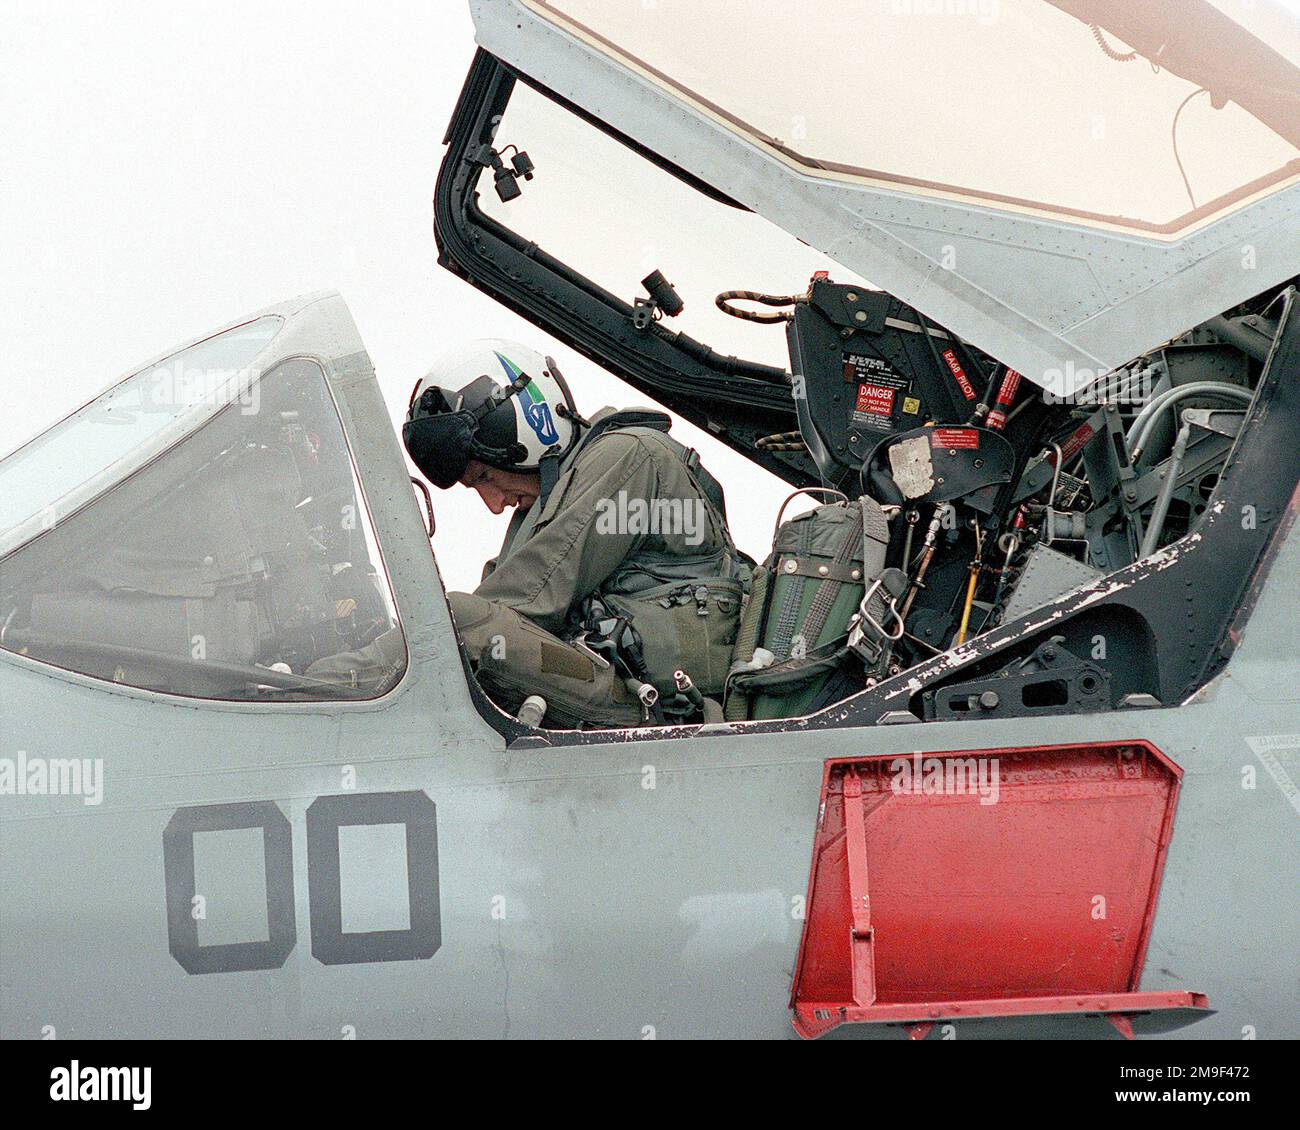 US Marine Corps Major Hull, from Electronic Warfare Squadron Marine Attack Squadron 4 (VMA-Q4), from Marine Corps Air Station Cherry Point, North Carolina, gets in the cockpit of his EA6-B Prowler aircraft ready for his flight duging Nato operation MAPLE FLAG 00 in Cold Lake, Canada. Subject Operation/Series: MAPLE FLAG 00 Base: Cold Lake State: Alberta (AB) Country: Canada (CAN) Stock Photo